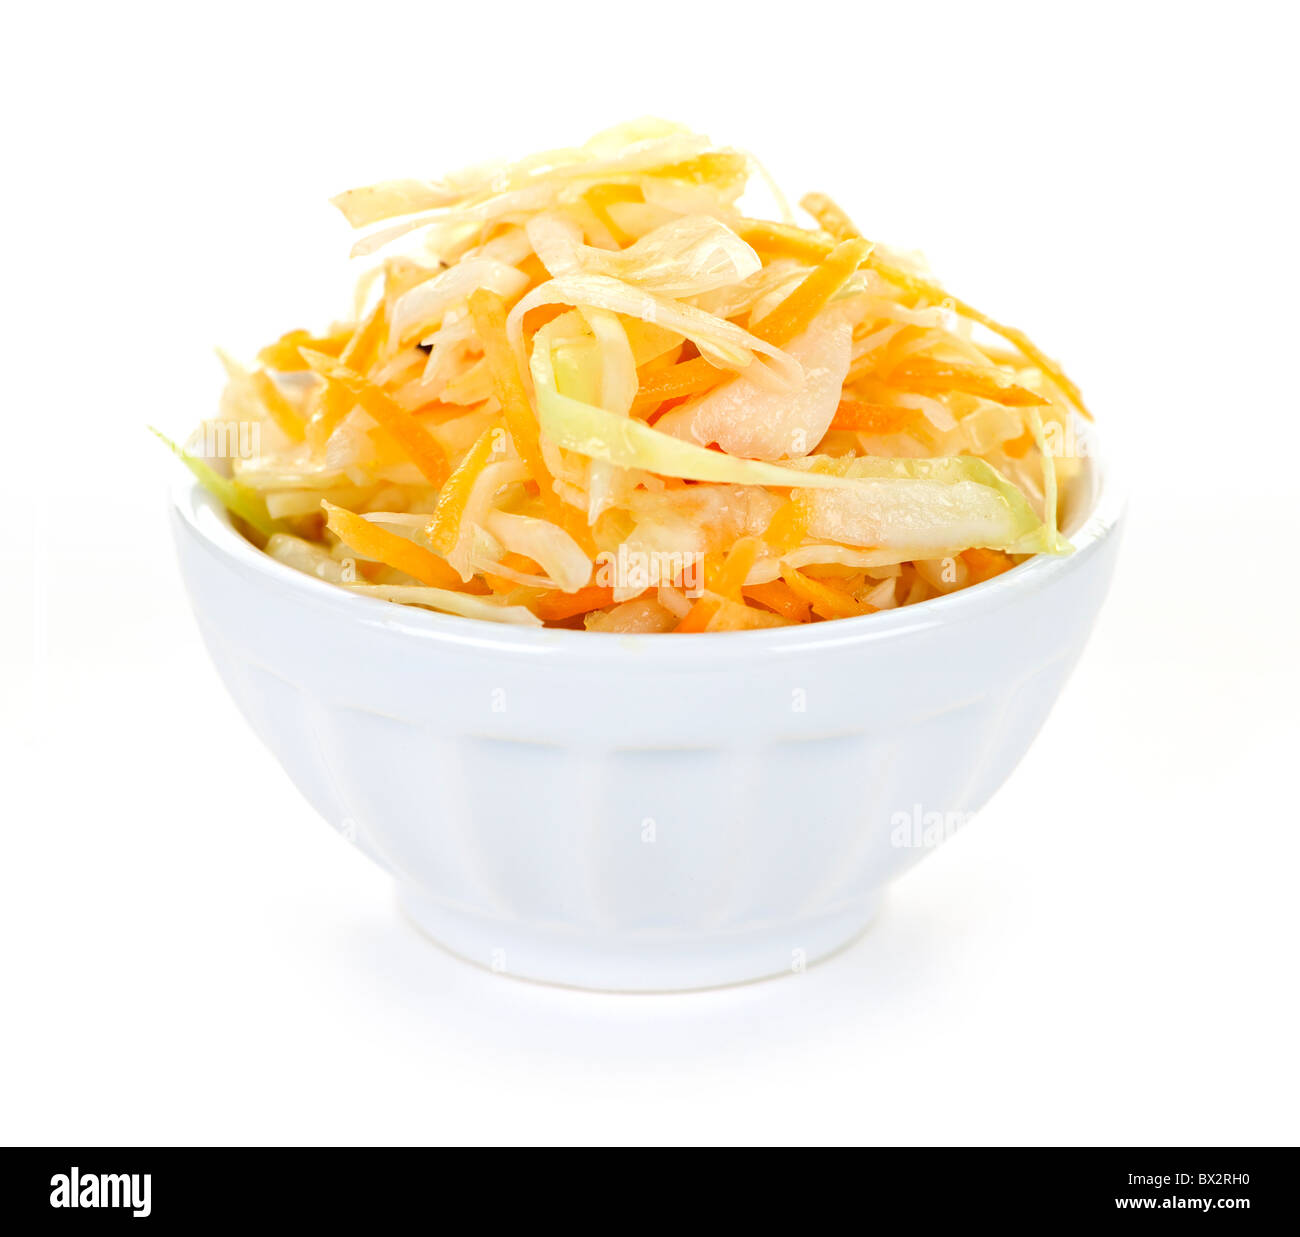 Bowl of coleslaw with shredded cabbage isolated on white background Stock Photo